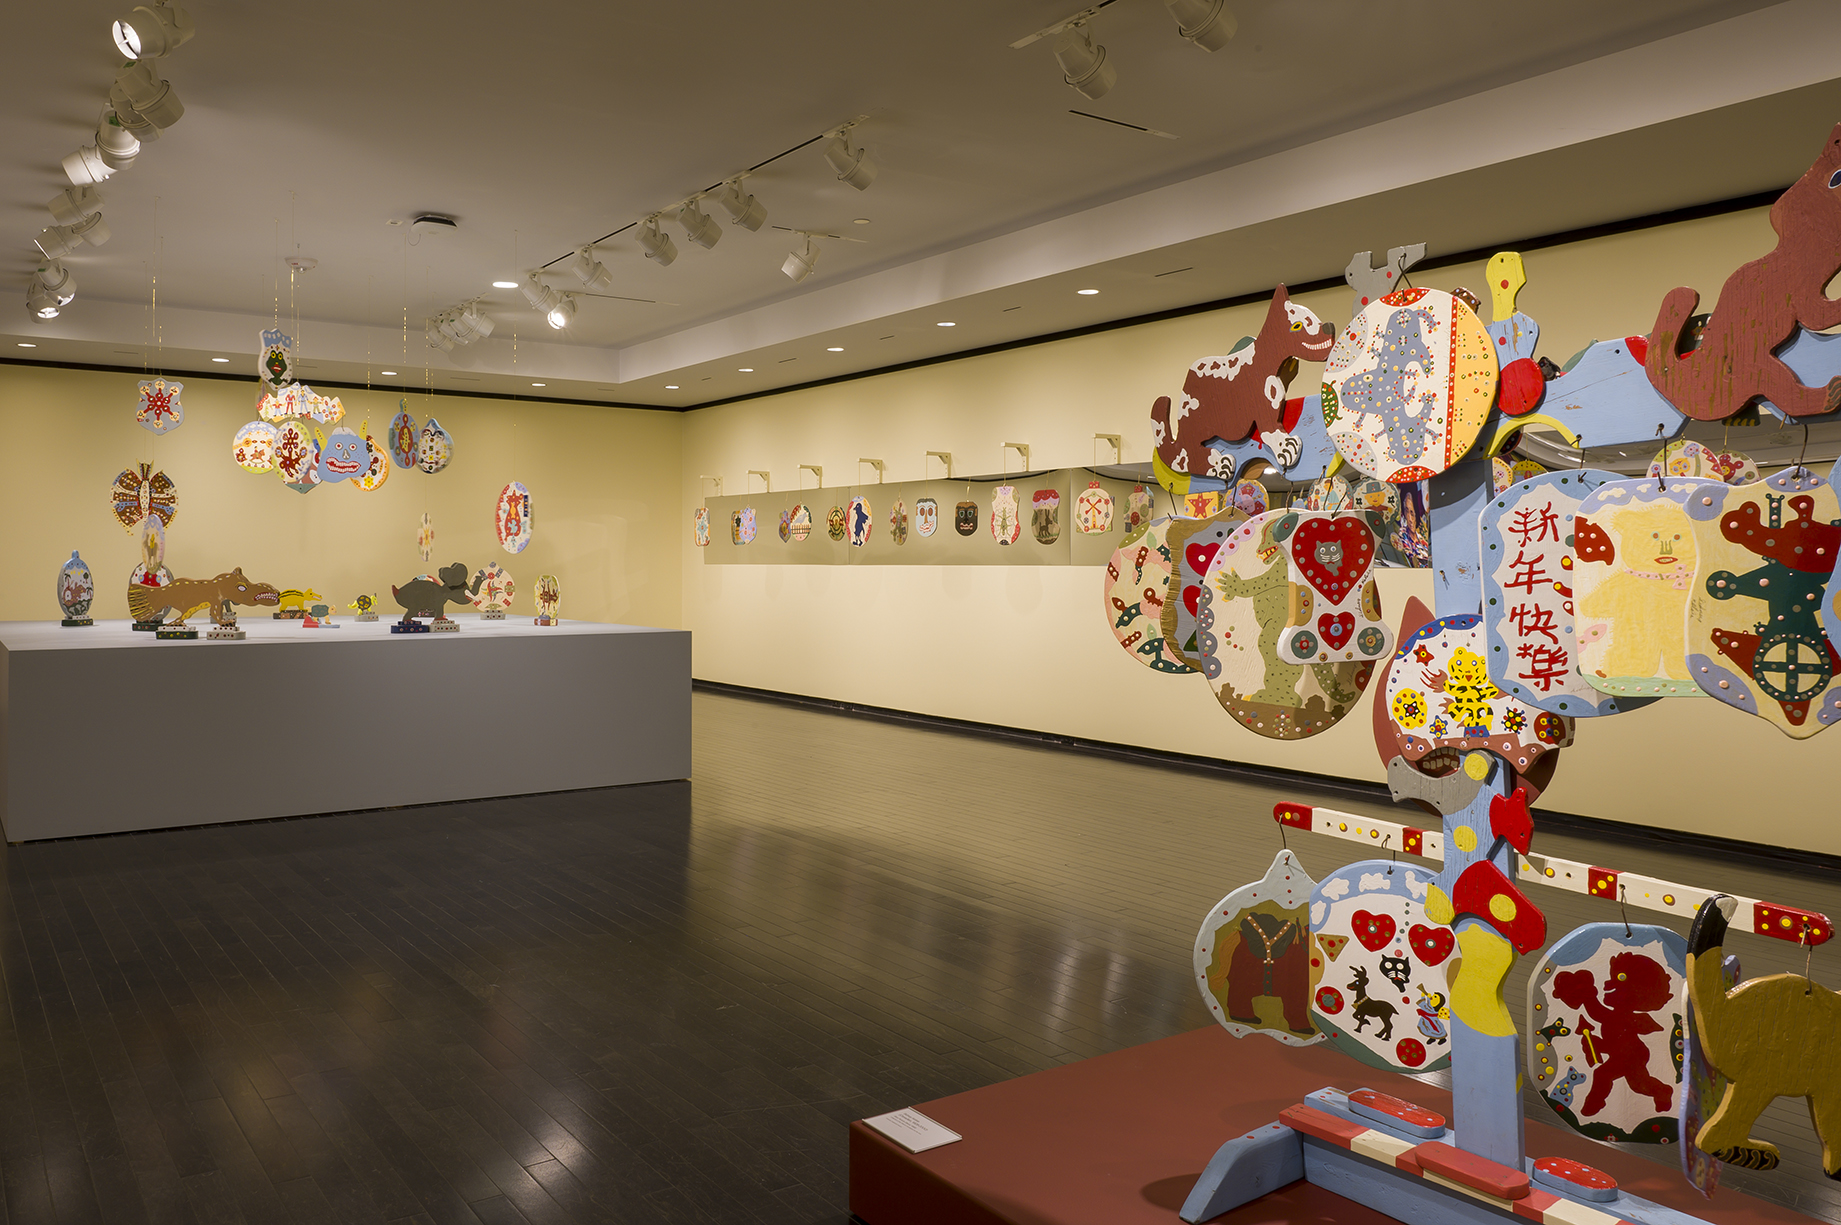 Installation view of the Sidney Kelsie exhibition at the Art Gallery of Alberta